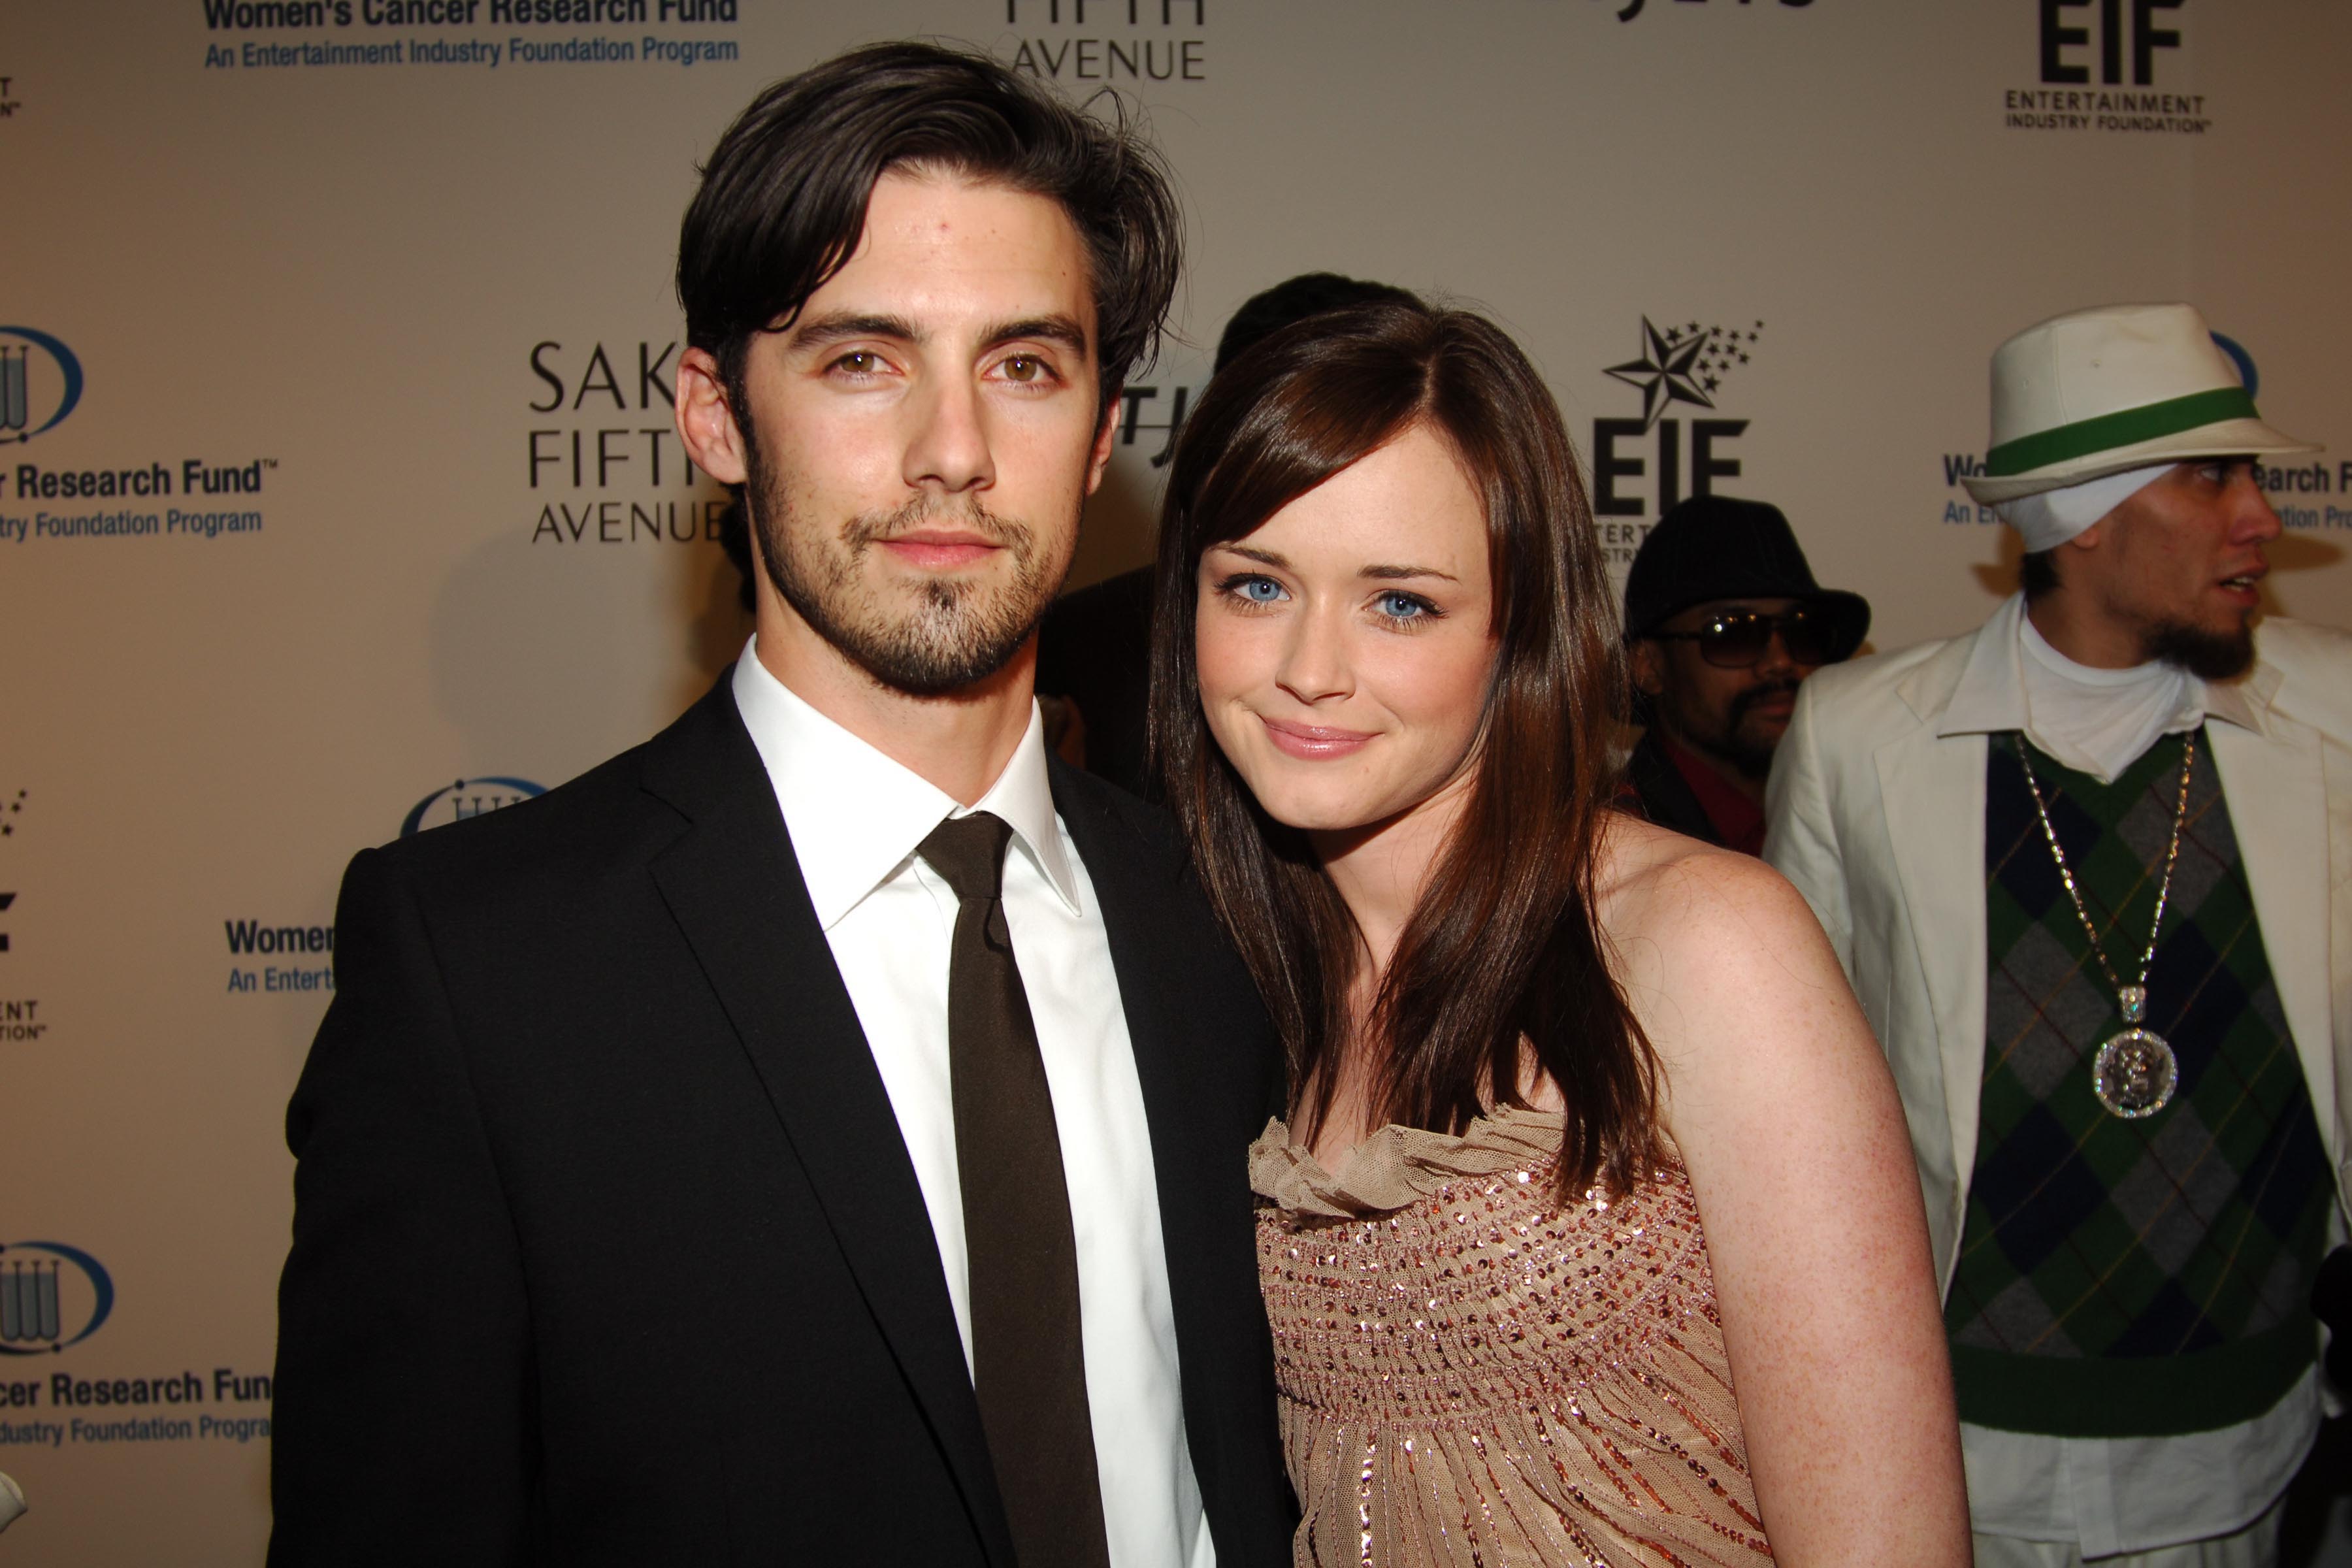 Alexis Bledel and Milo Ventimiglia pose for a photo afer arriving at the Women's Cancer Research Fund Honors Melissa Etheridge event in 2006